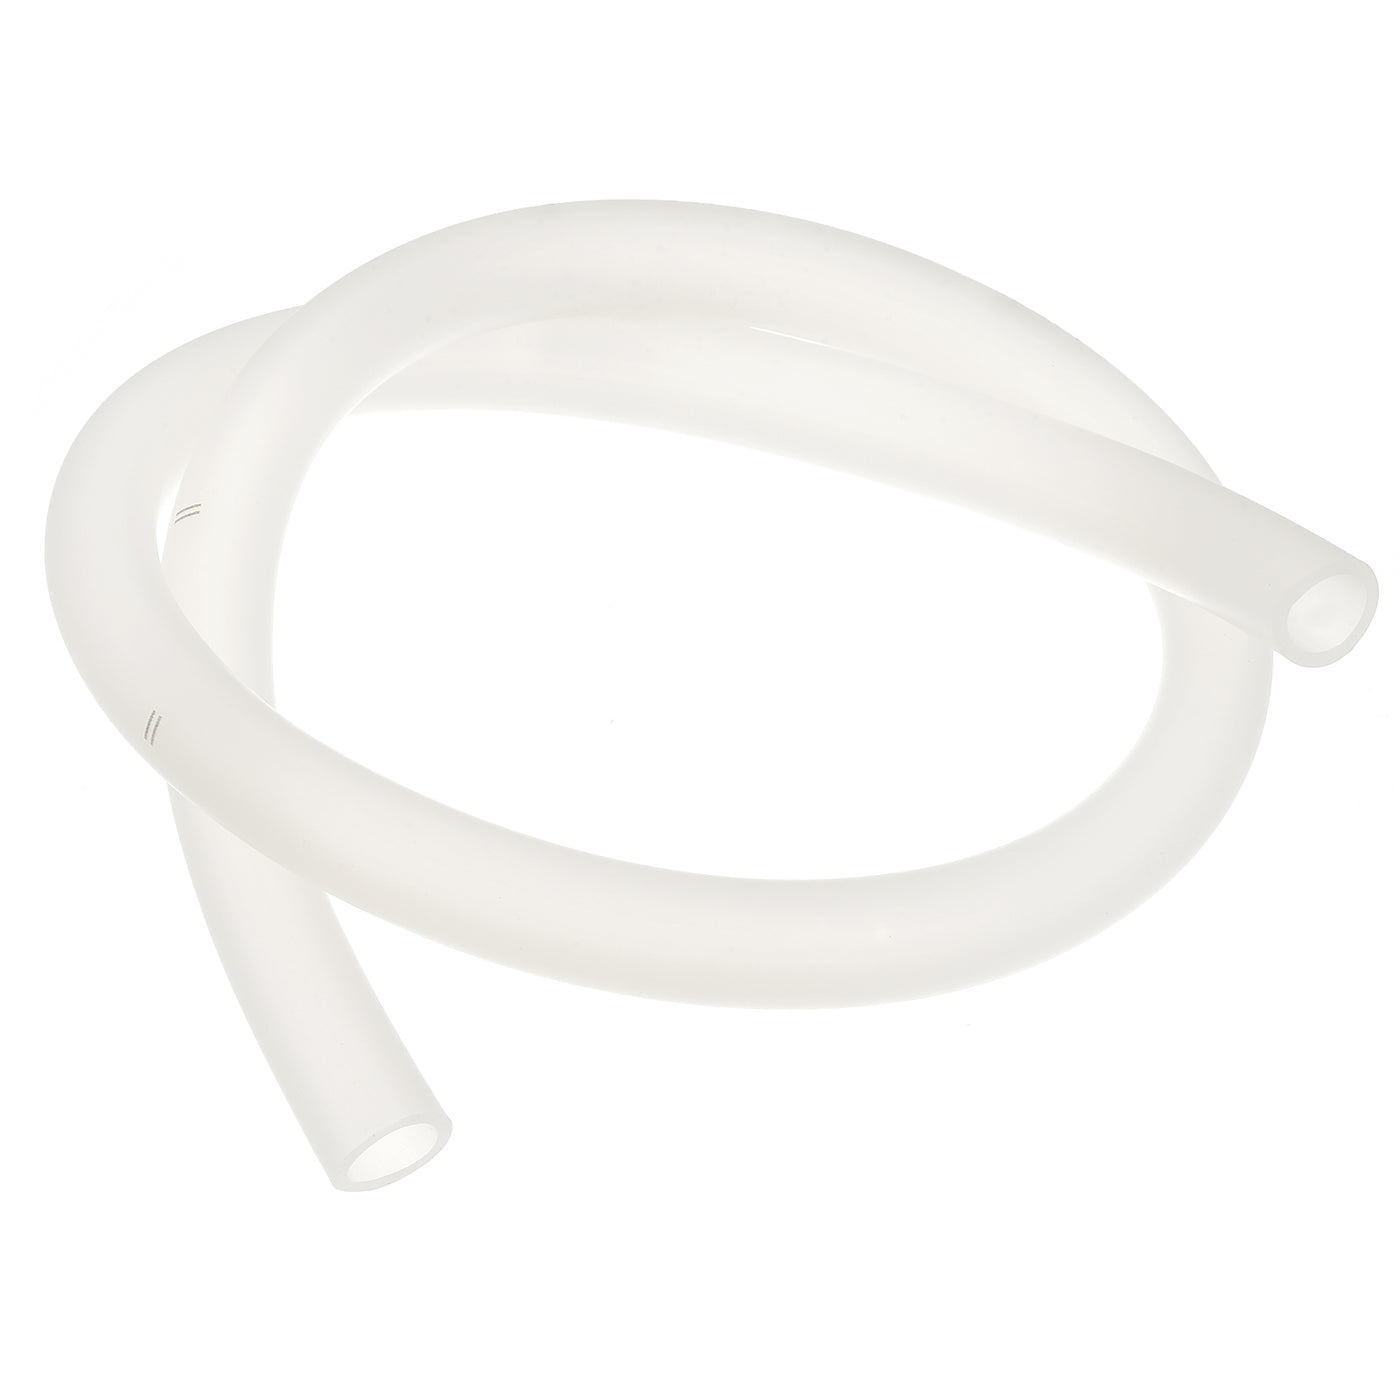 uxcell Uxcell PVC Tubing 5/8" ID, 55/64" OD 1Pcs 3.28 Ft for Transfer, White